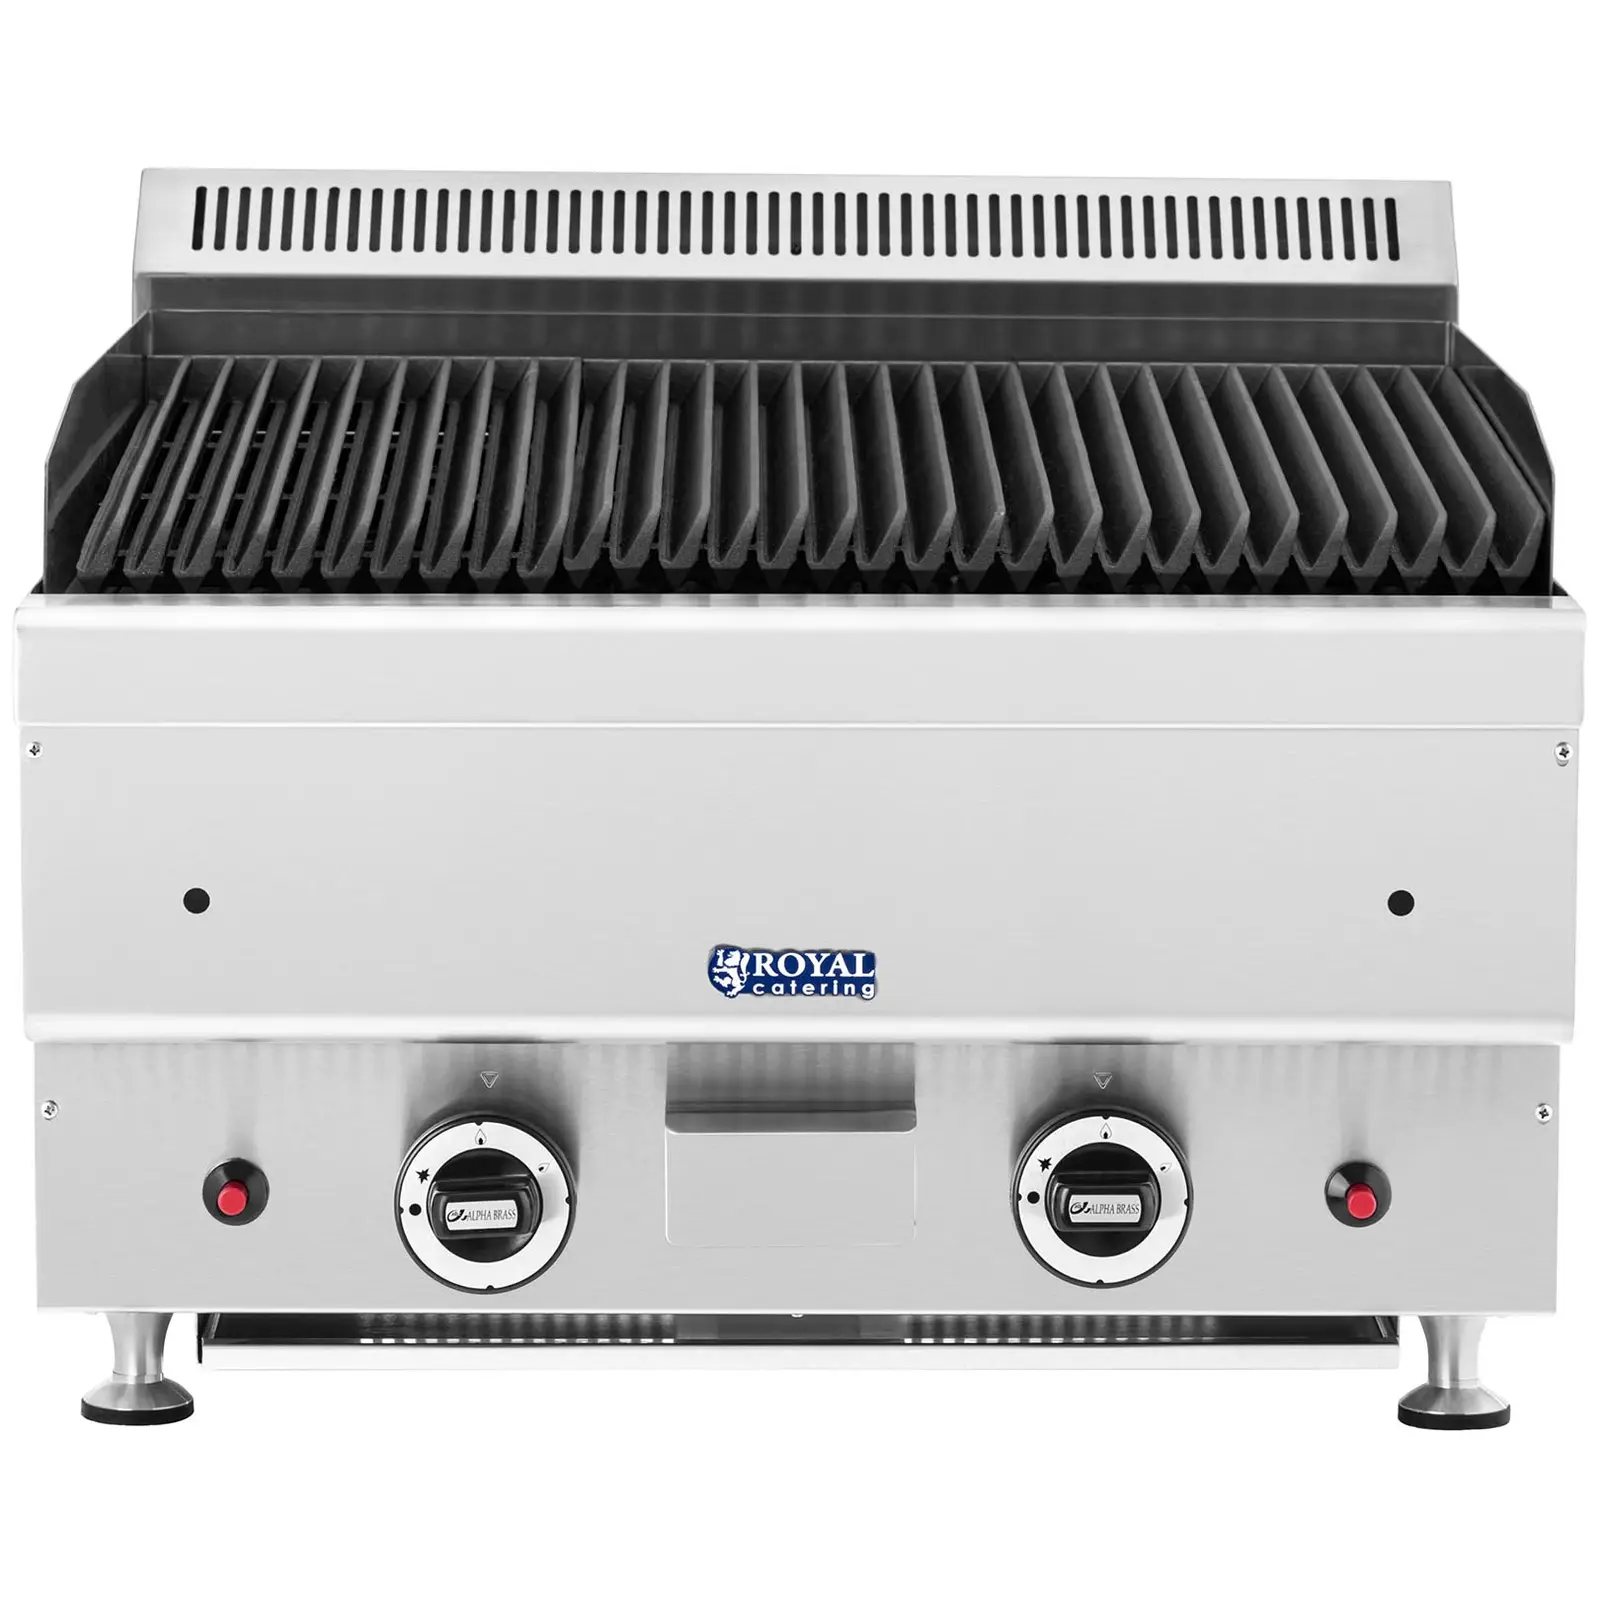 Lava Stone Grill - 2 x 7200 W - 50 x 47 cm - 0 - 460 °C - Royal Catering